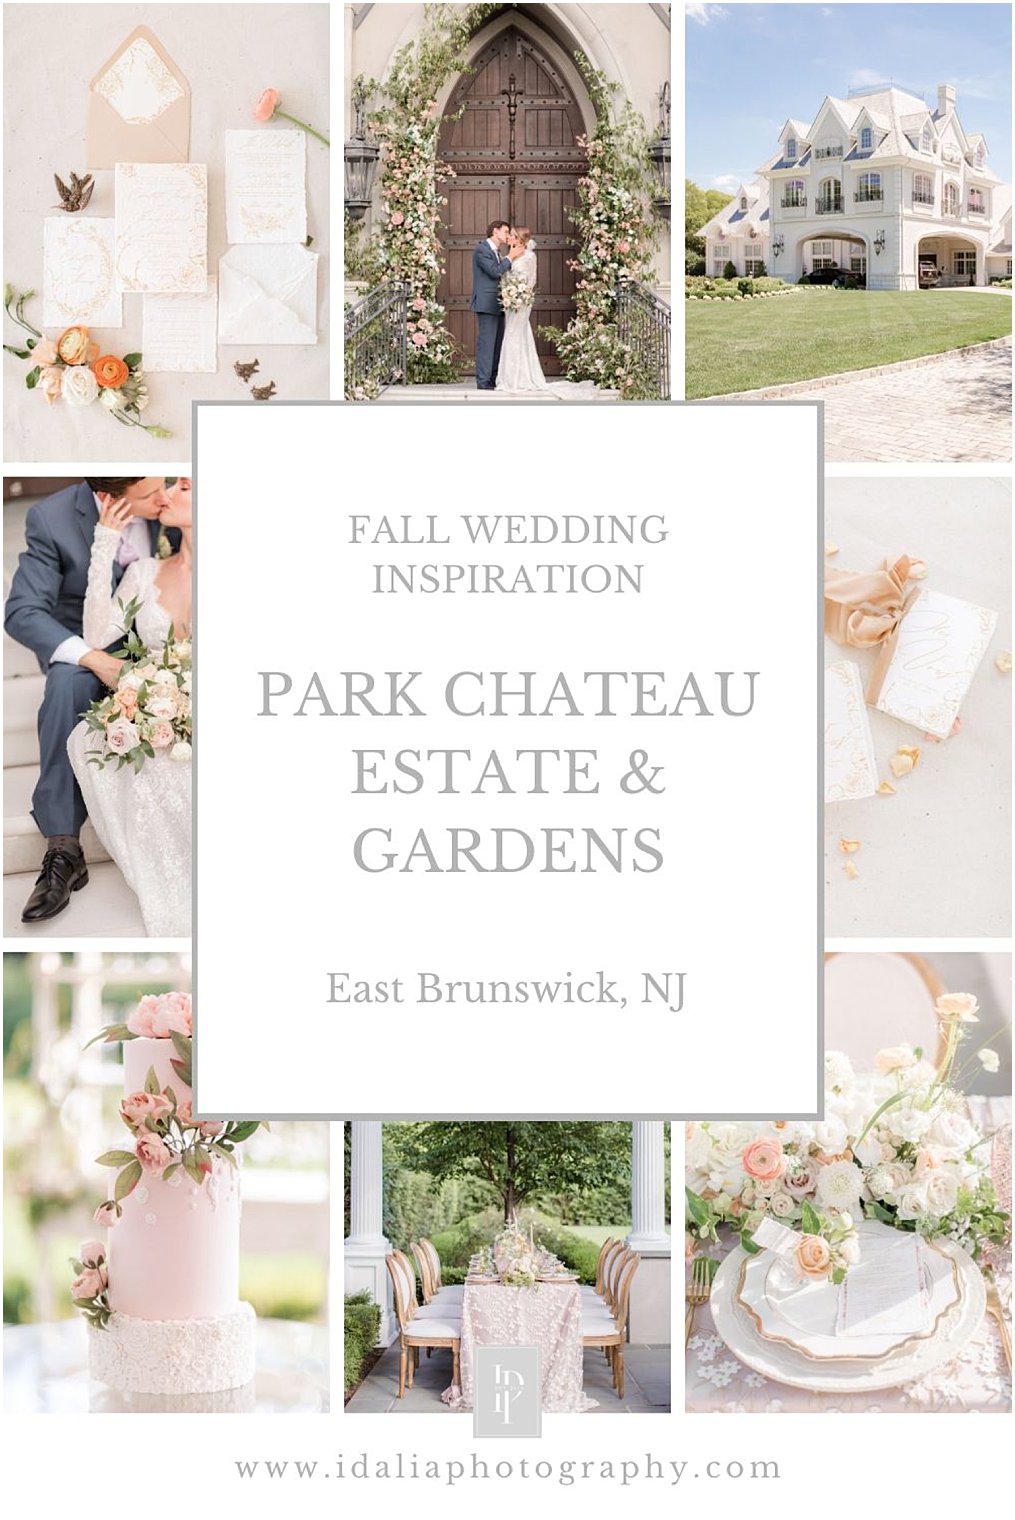 Fall wedding editorial at Park Chateau Estate and Gardens in East Brunswick, NJ